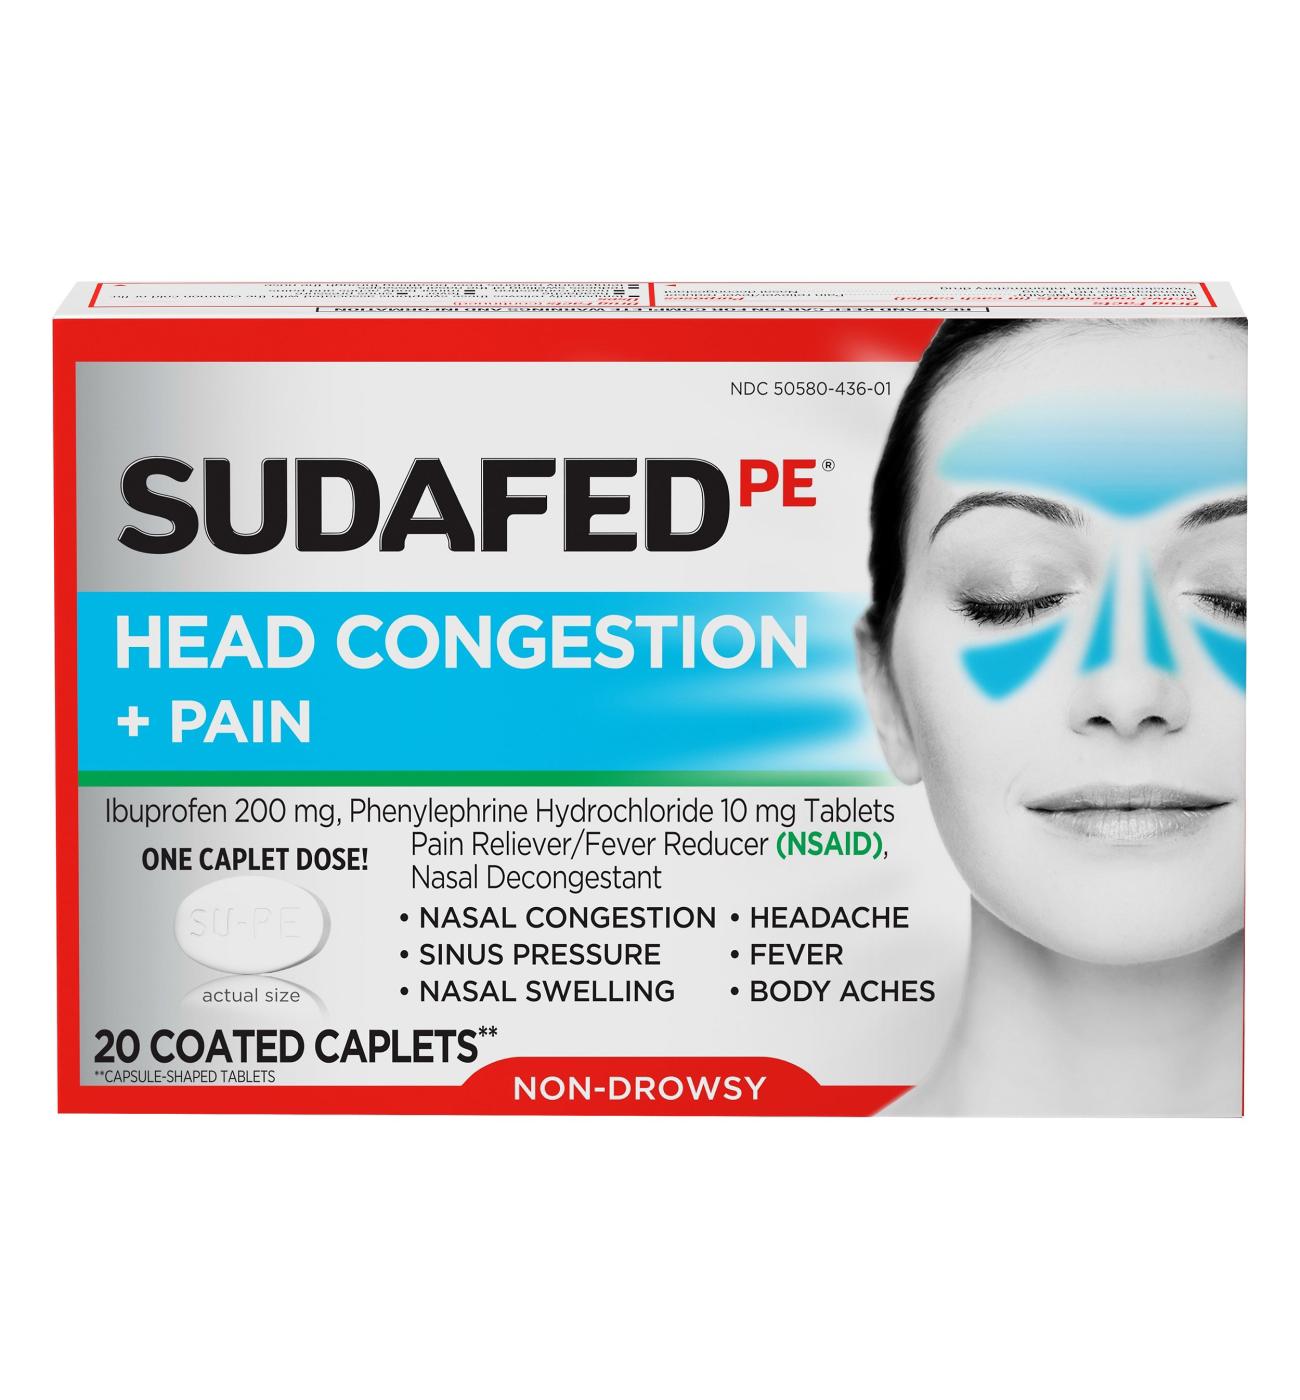 Sudafed PE Head Congestion + Pain Coated Tablets; image 1 of 6